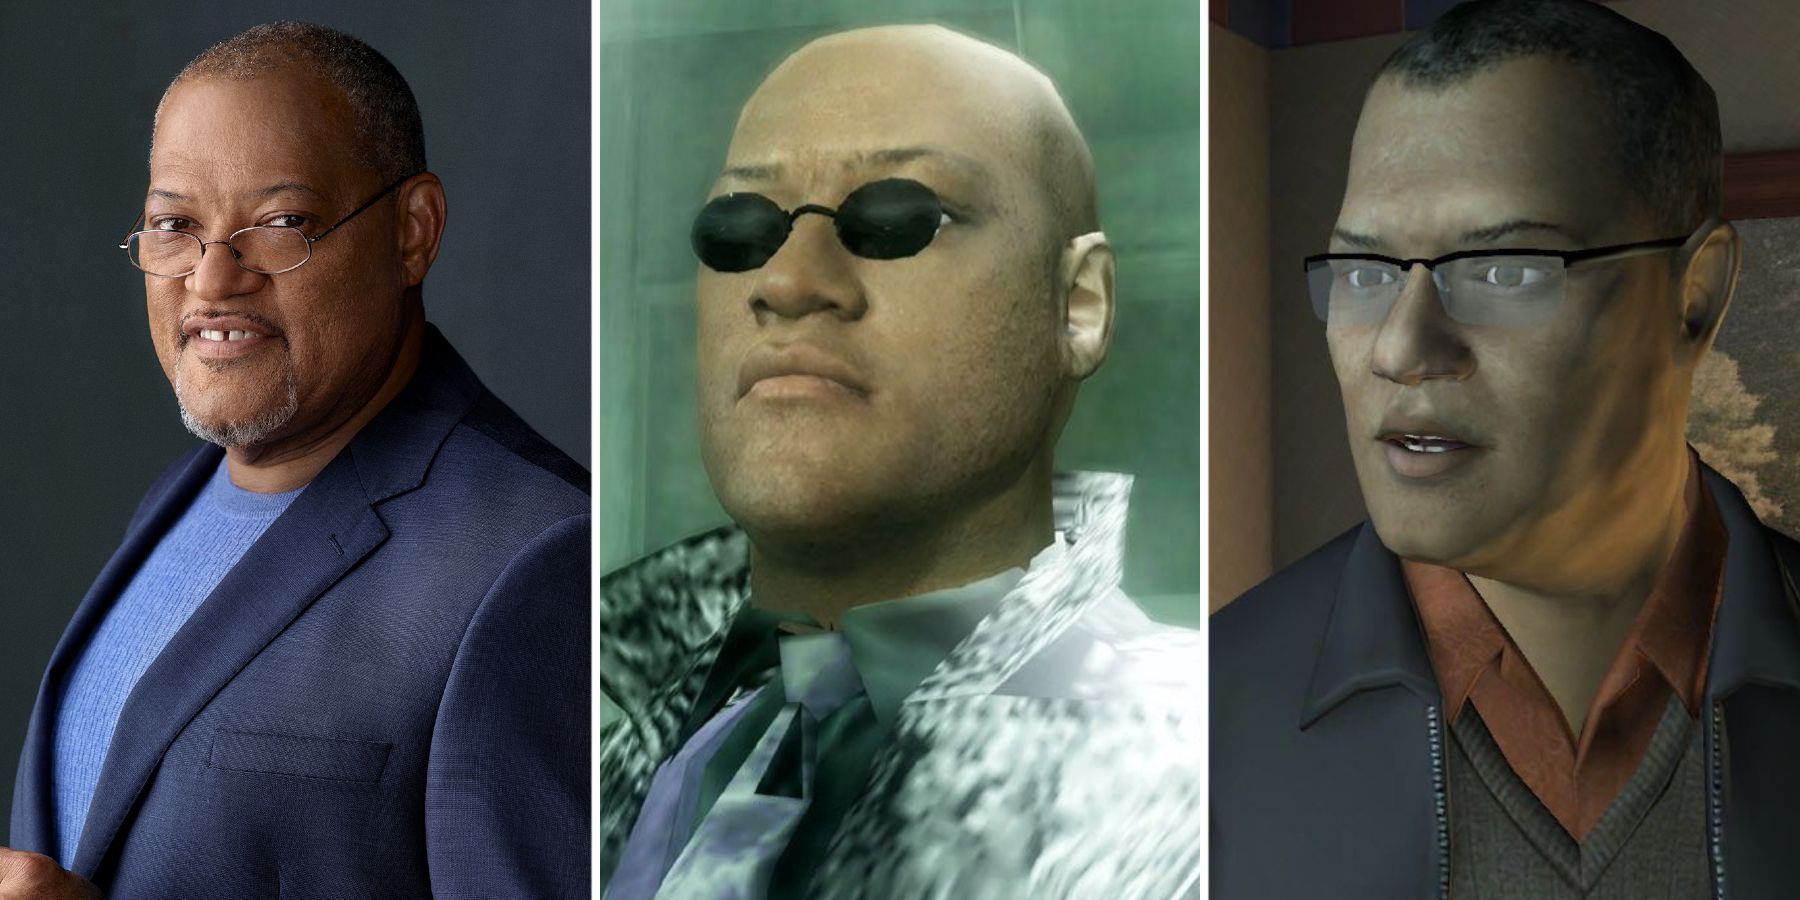 Laurence Fishburne and his role as Morpheus in The Matrix: Path of Neo and as Dr Raymond Langston in CSI: Deadly Intent